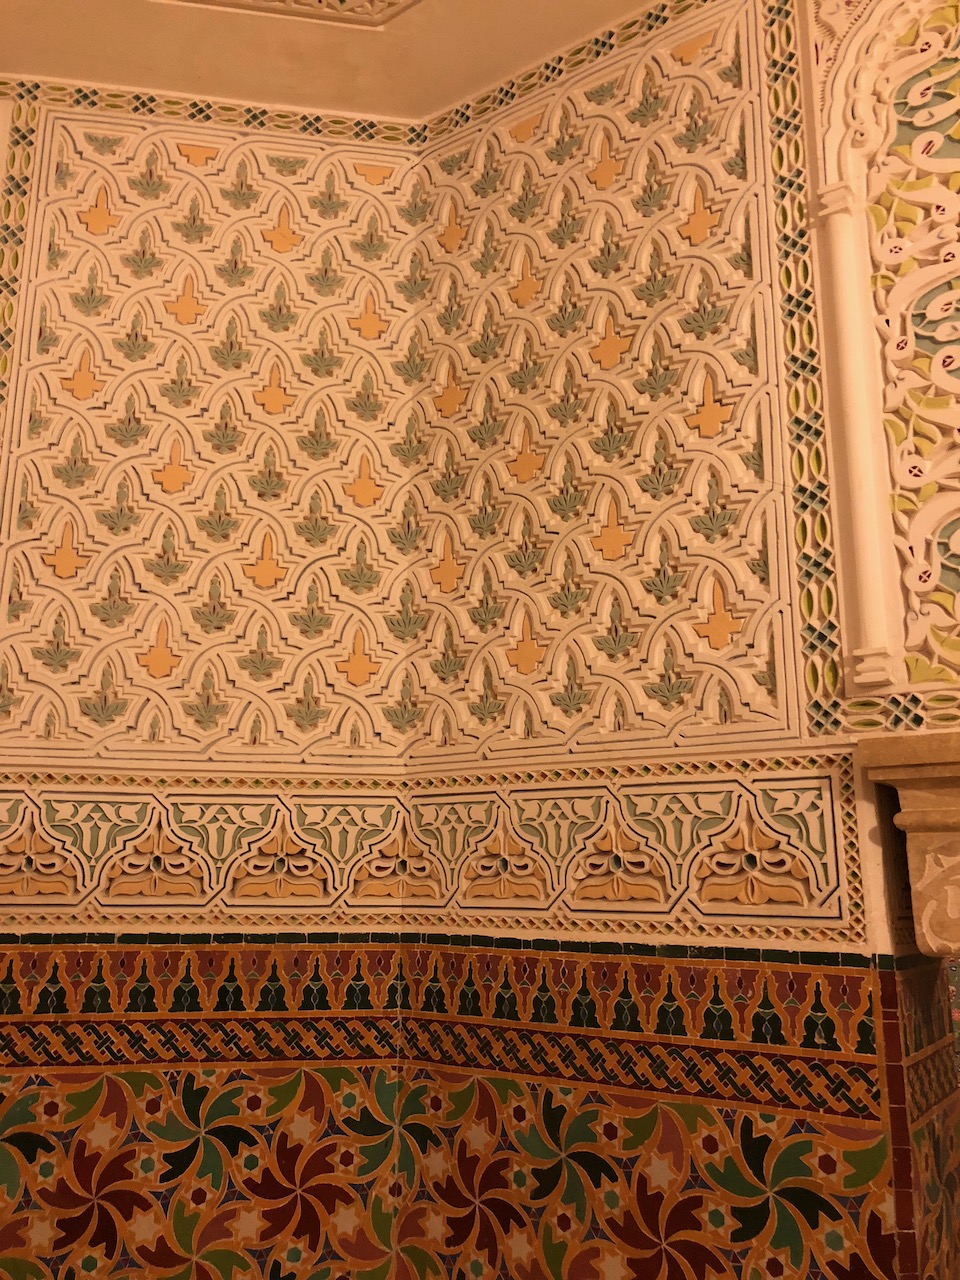 Interior, detail view of stucco decoration.